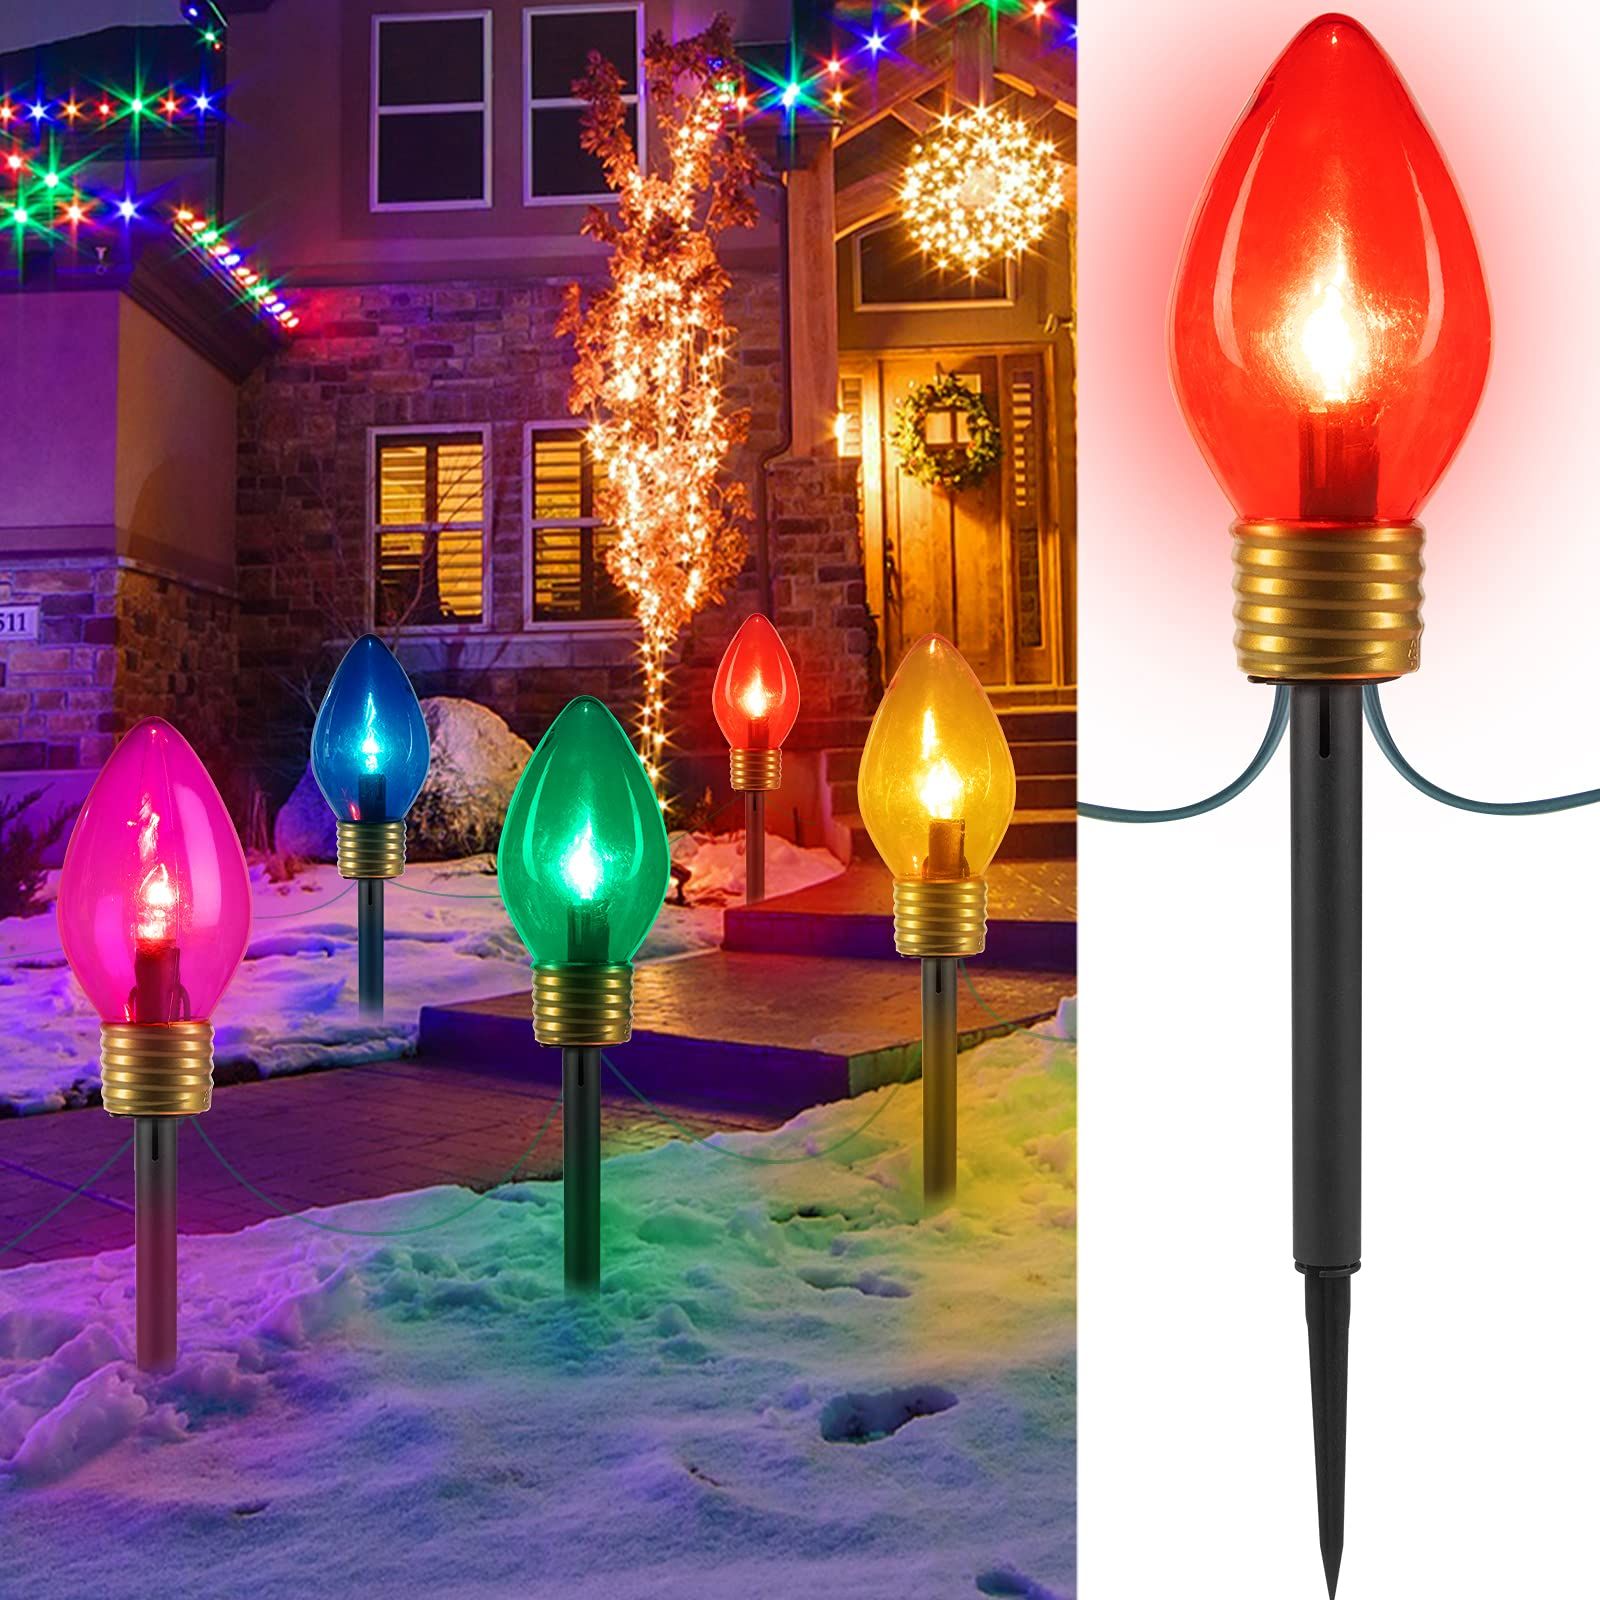 Jumbo C9 Christmas Lights Outdoor Decorations Lawn with Pathway Marker Stakes, 2 Pack 8.5 Feet C7 St | Amazon (US)